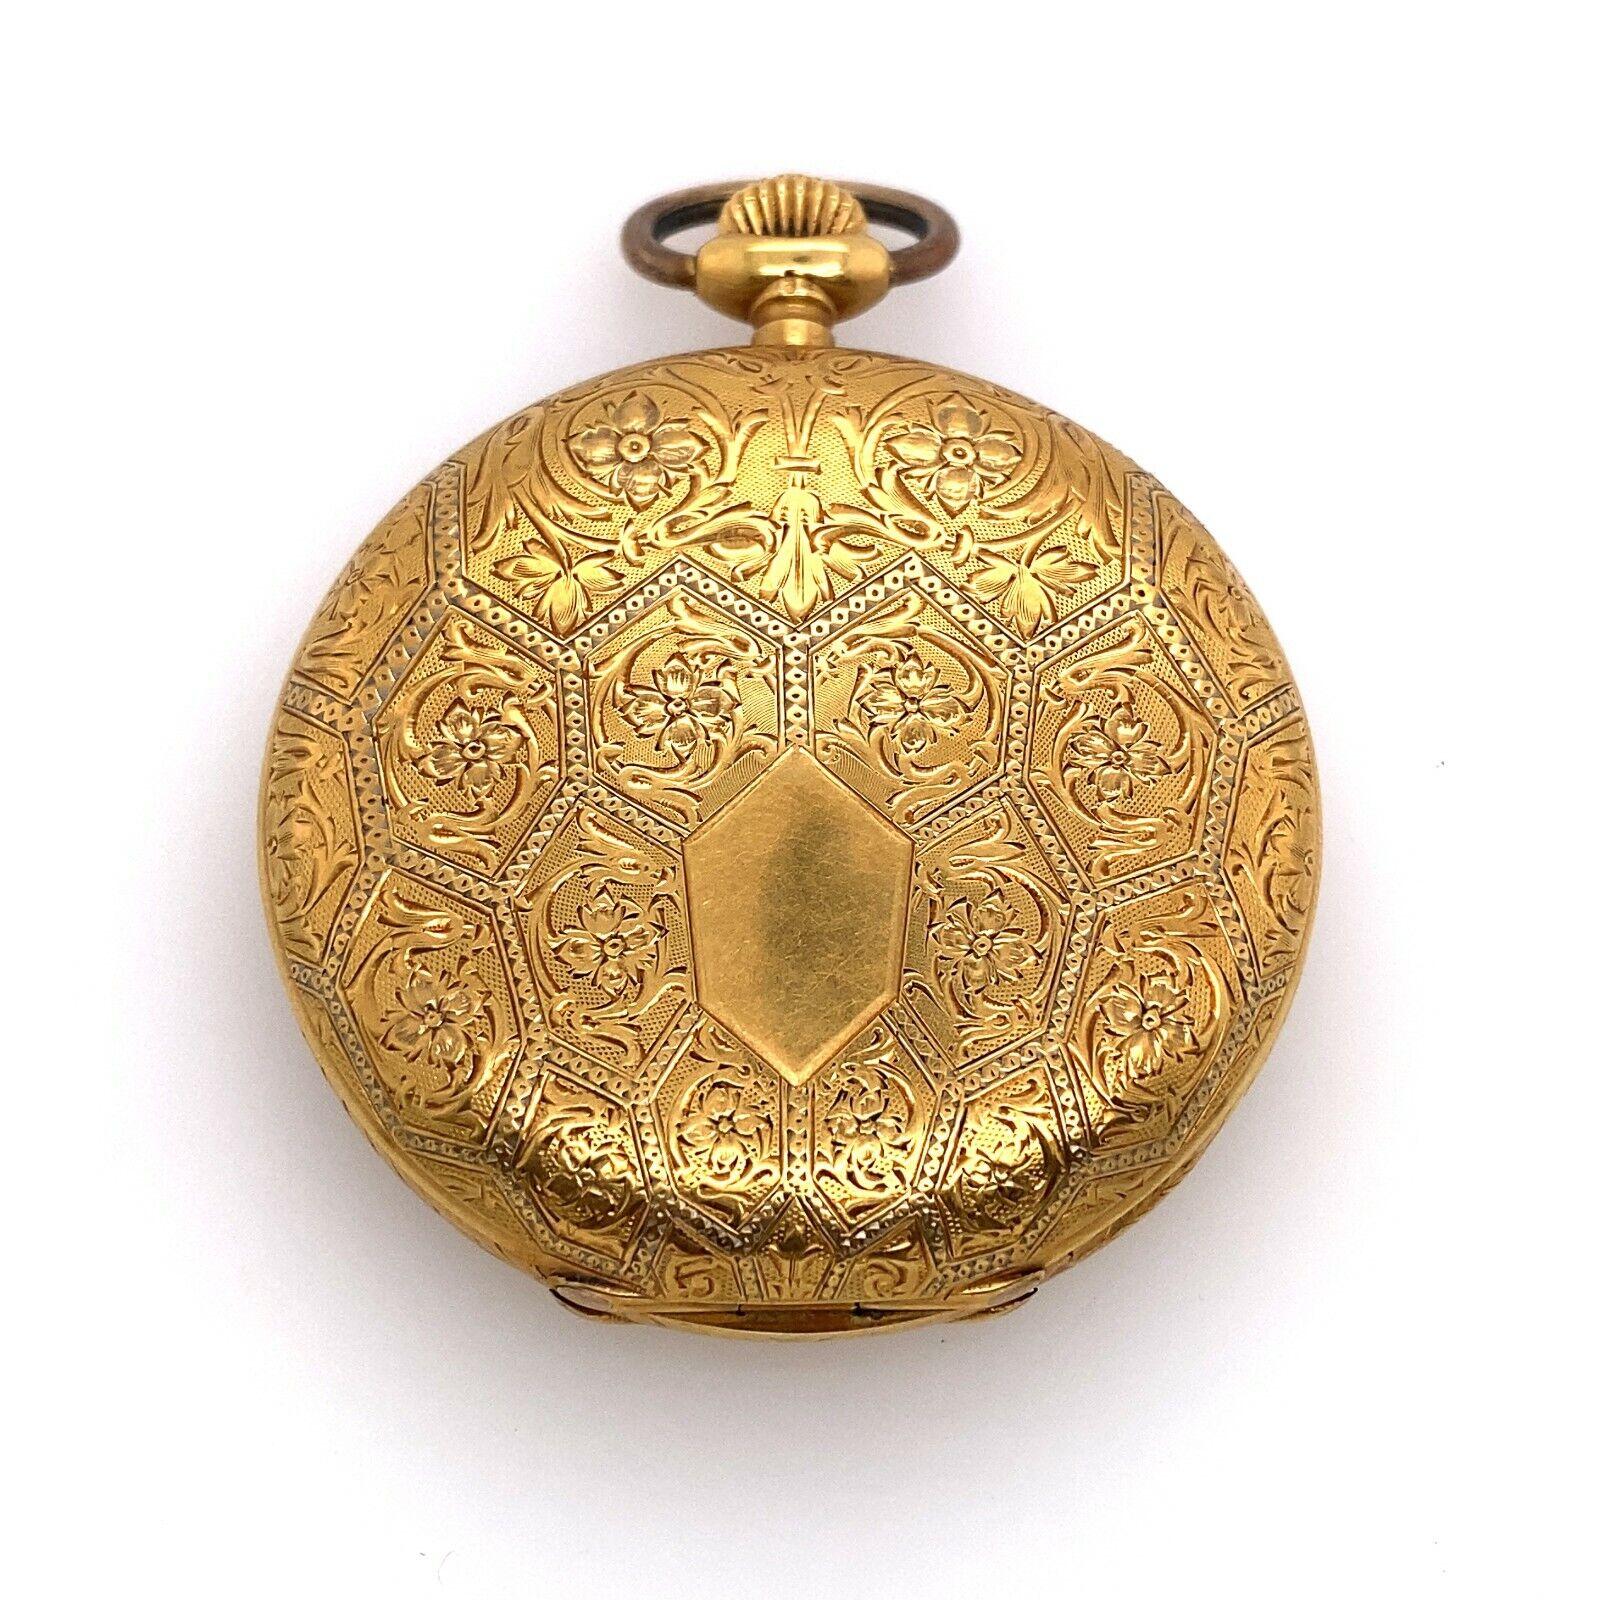 18ct Yellow Gold Original Vulcain Pocket Watch, In Perfect Condition

Additional Information: 
Serial Number 1900497
Total Weight: 64.9g
Number of Jewels:16
Diameter of Watch without Crown: 45.7mm
Diameter of Watch With Crown: 60.0mm
France